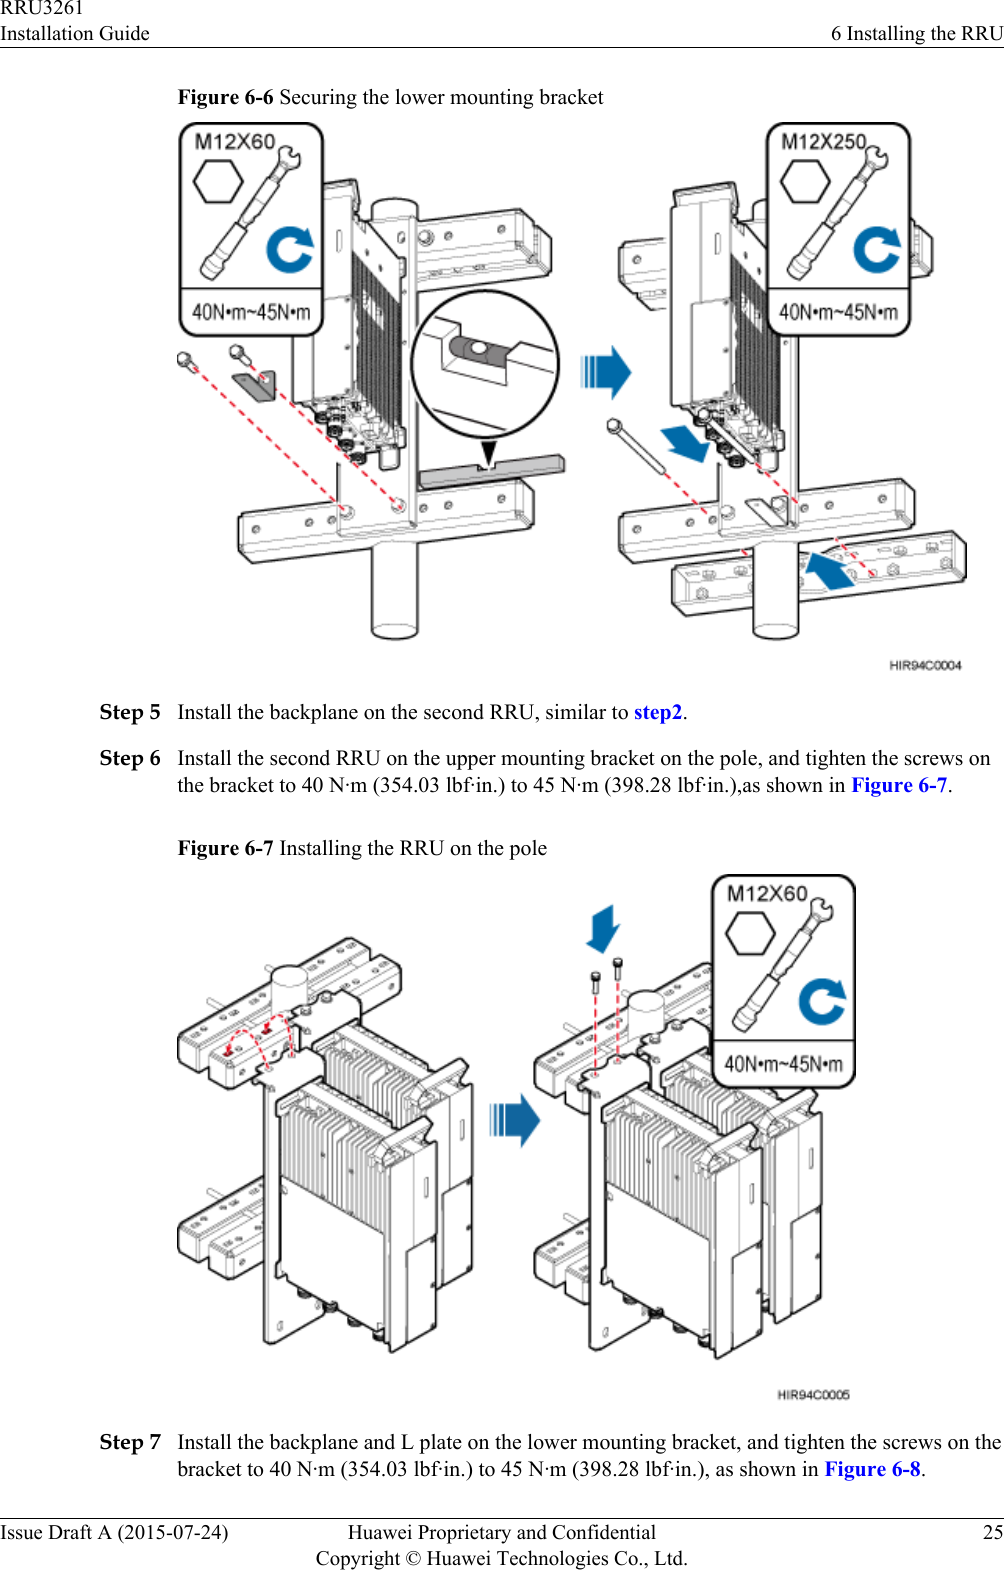 Figure 6-6 Securing the lower mounting bracketStep 5 Install the backplane on the second RRU, similar to step2.Step 6 Install the second RRU on the upper mounting bracket on the pole, and tighten the screws onthe bracket to 40 N·m (354.03 lbf·in.) to 45 N·m (398.28 lbf·in.),as shown in Figure 6-7.Figure 6-7 Installing the RRU on the poleStep 7 Install the backplane and L plate on the lower mounting bracket, and tighten the screws on thebracket to 40 N·m (354.03 lbf·in.) to 45 N·m (398.28 lbf·in.), as shown in Figure 6-8.RRU3261Installation Guide 6 Installing the RRUIssue Draft A (2015-07-24) Huawei Proprietary and ConfidentialCopyright © Huawei Technologies Co., Ltd.25